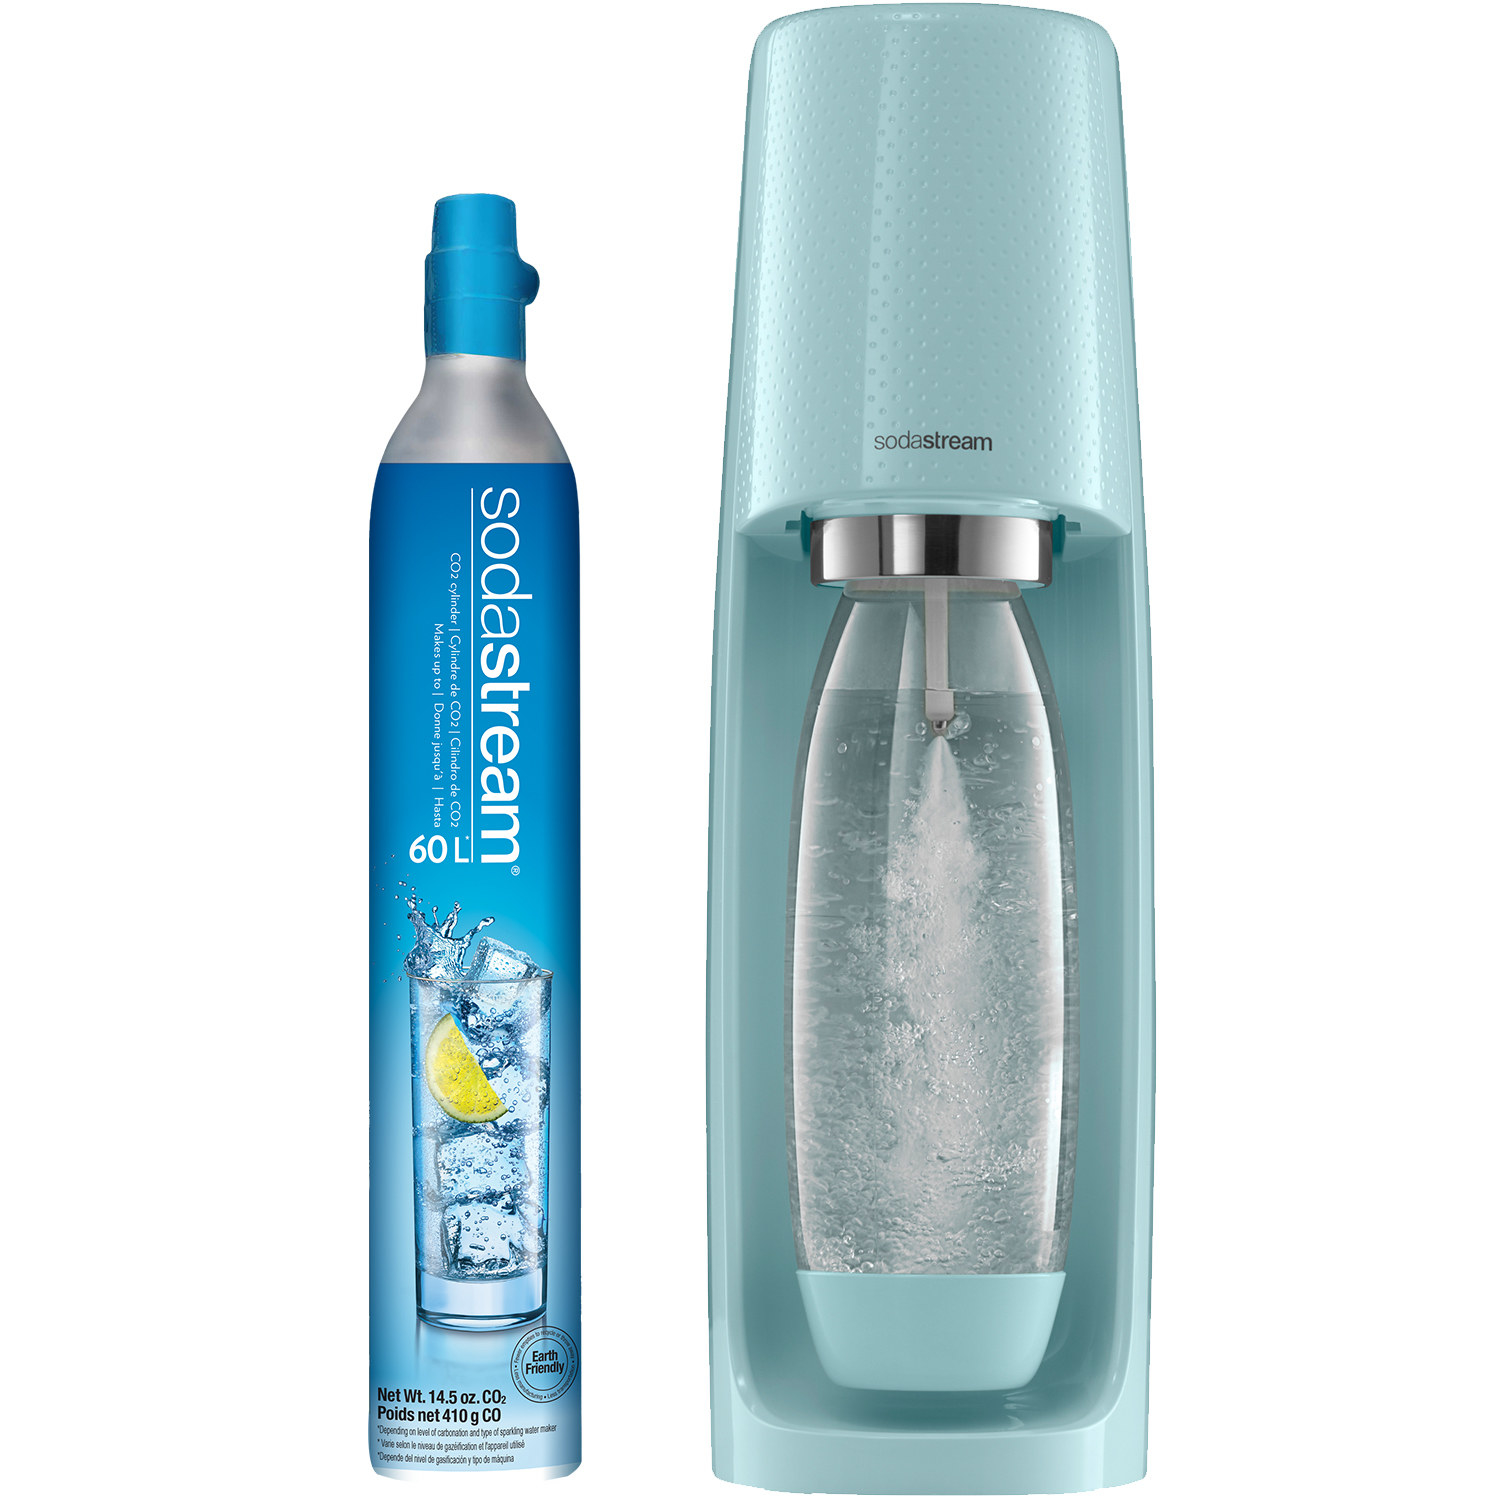 The blue CO2 canister and blue SodaStream